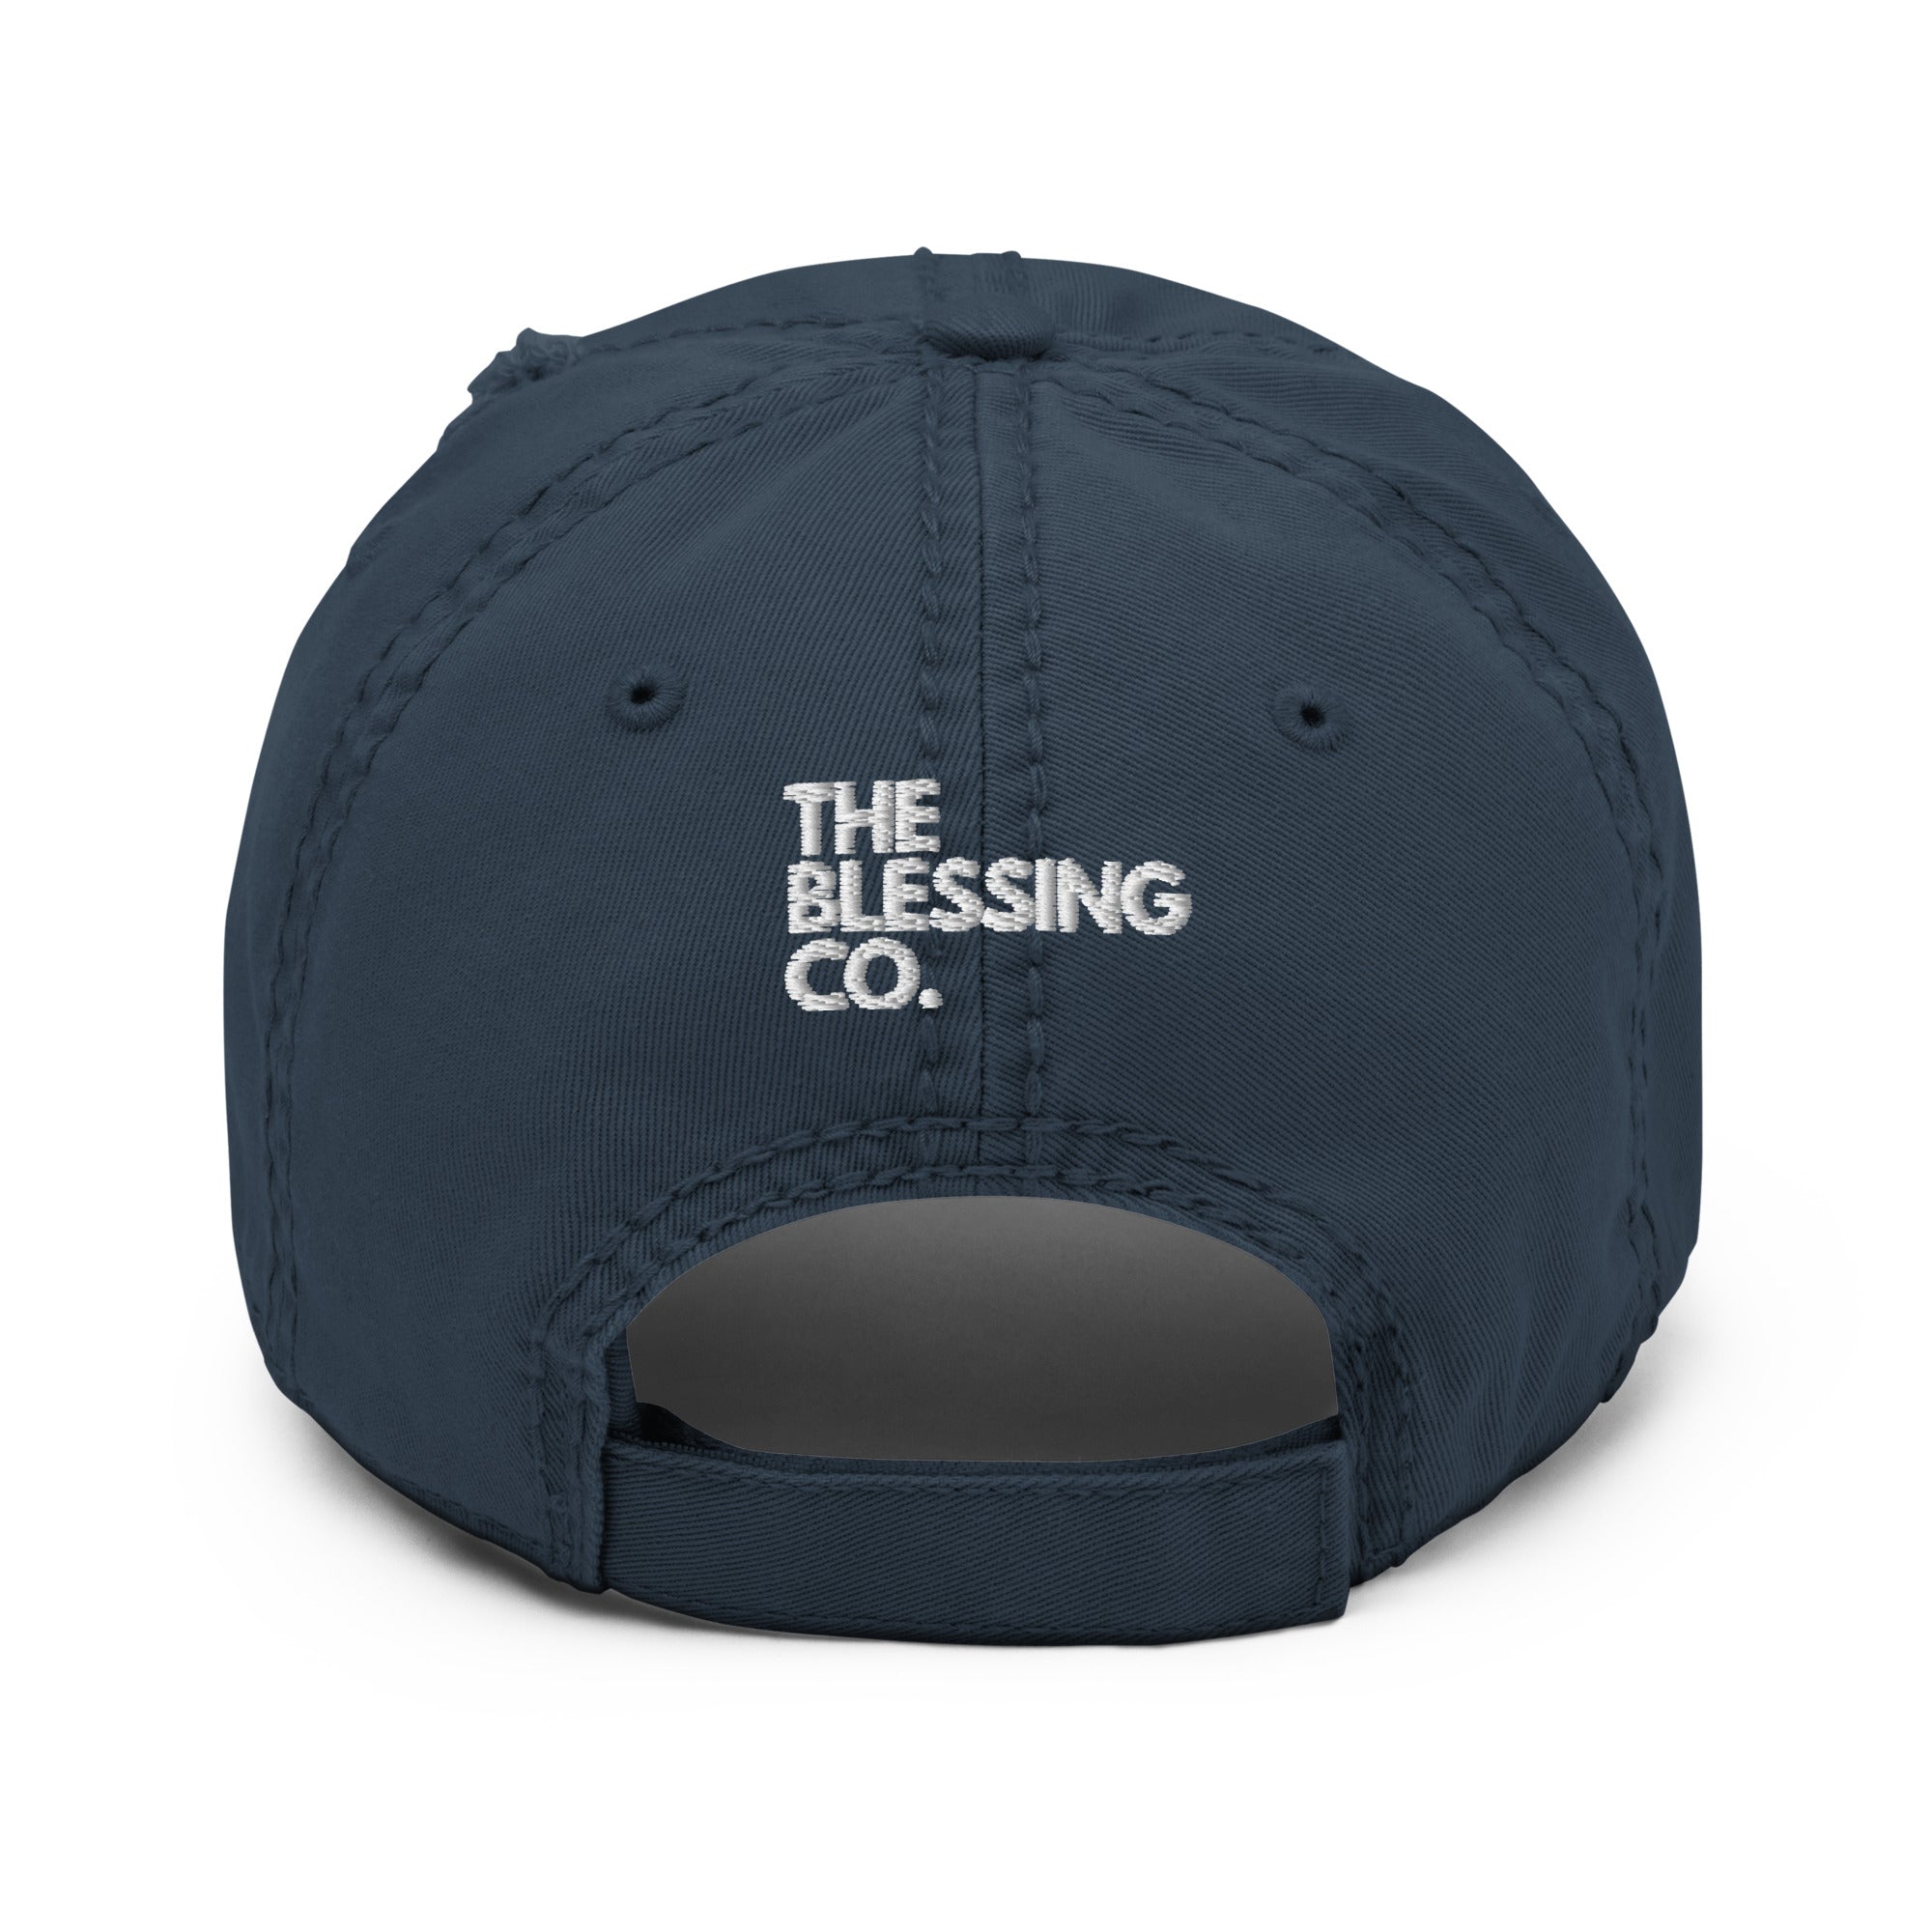 The Blessing Co. Distressed Hat